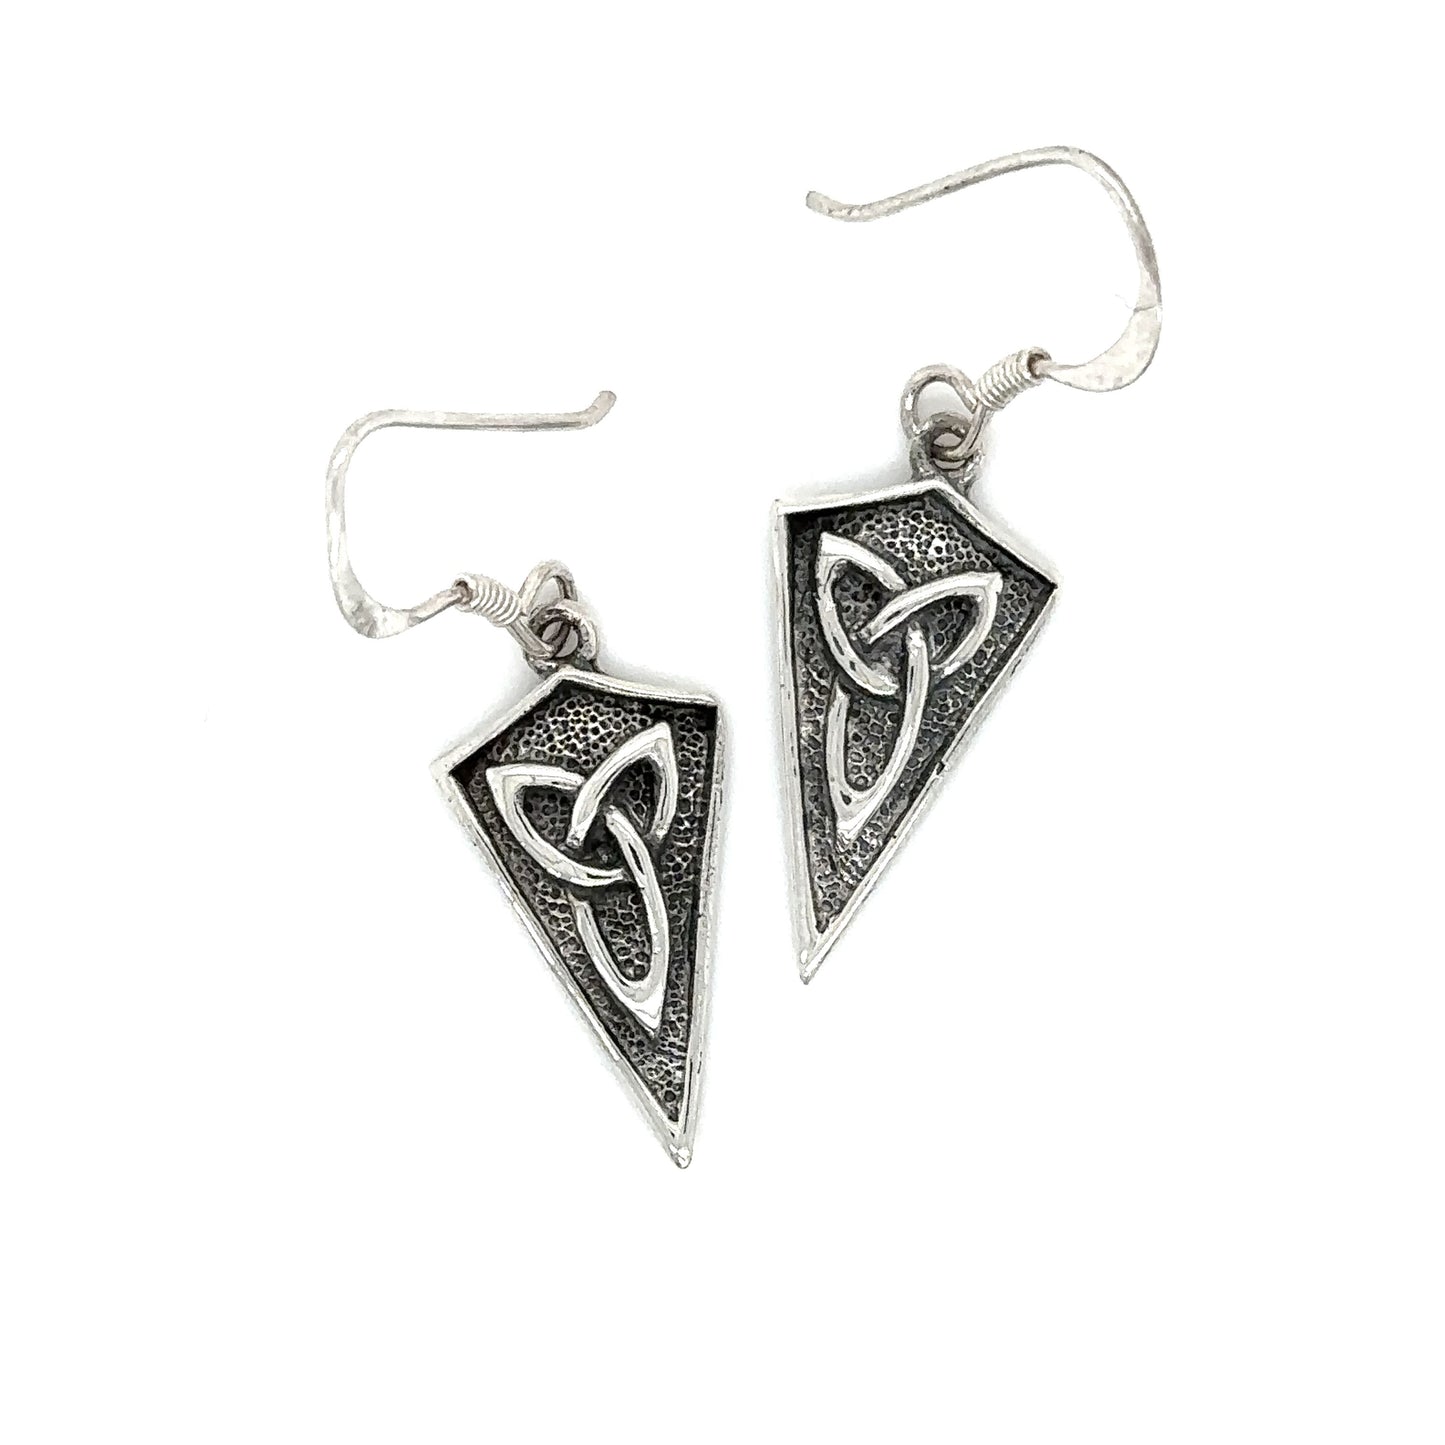 A pair of Super Silver Celtic Trinity Shield Earrings, symbolizing love and unity.